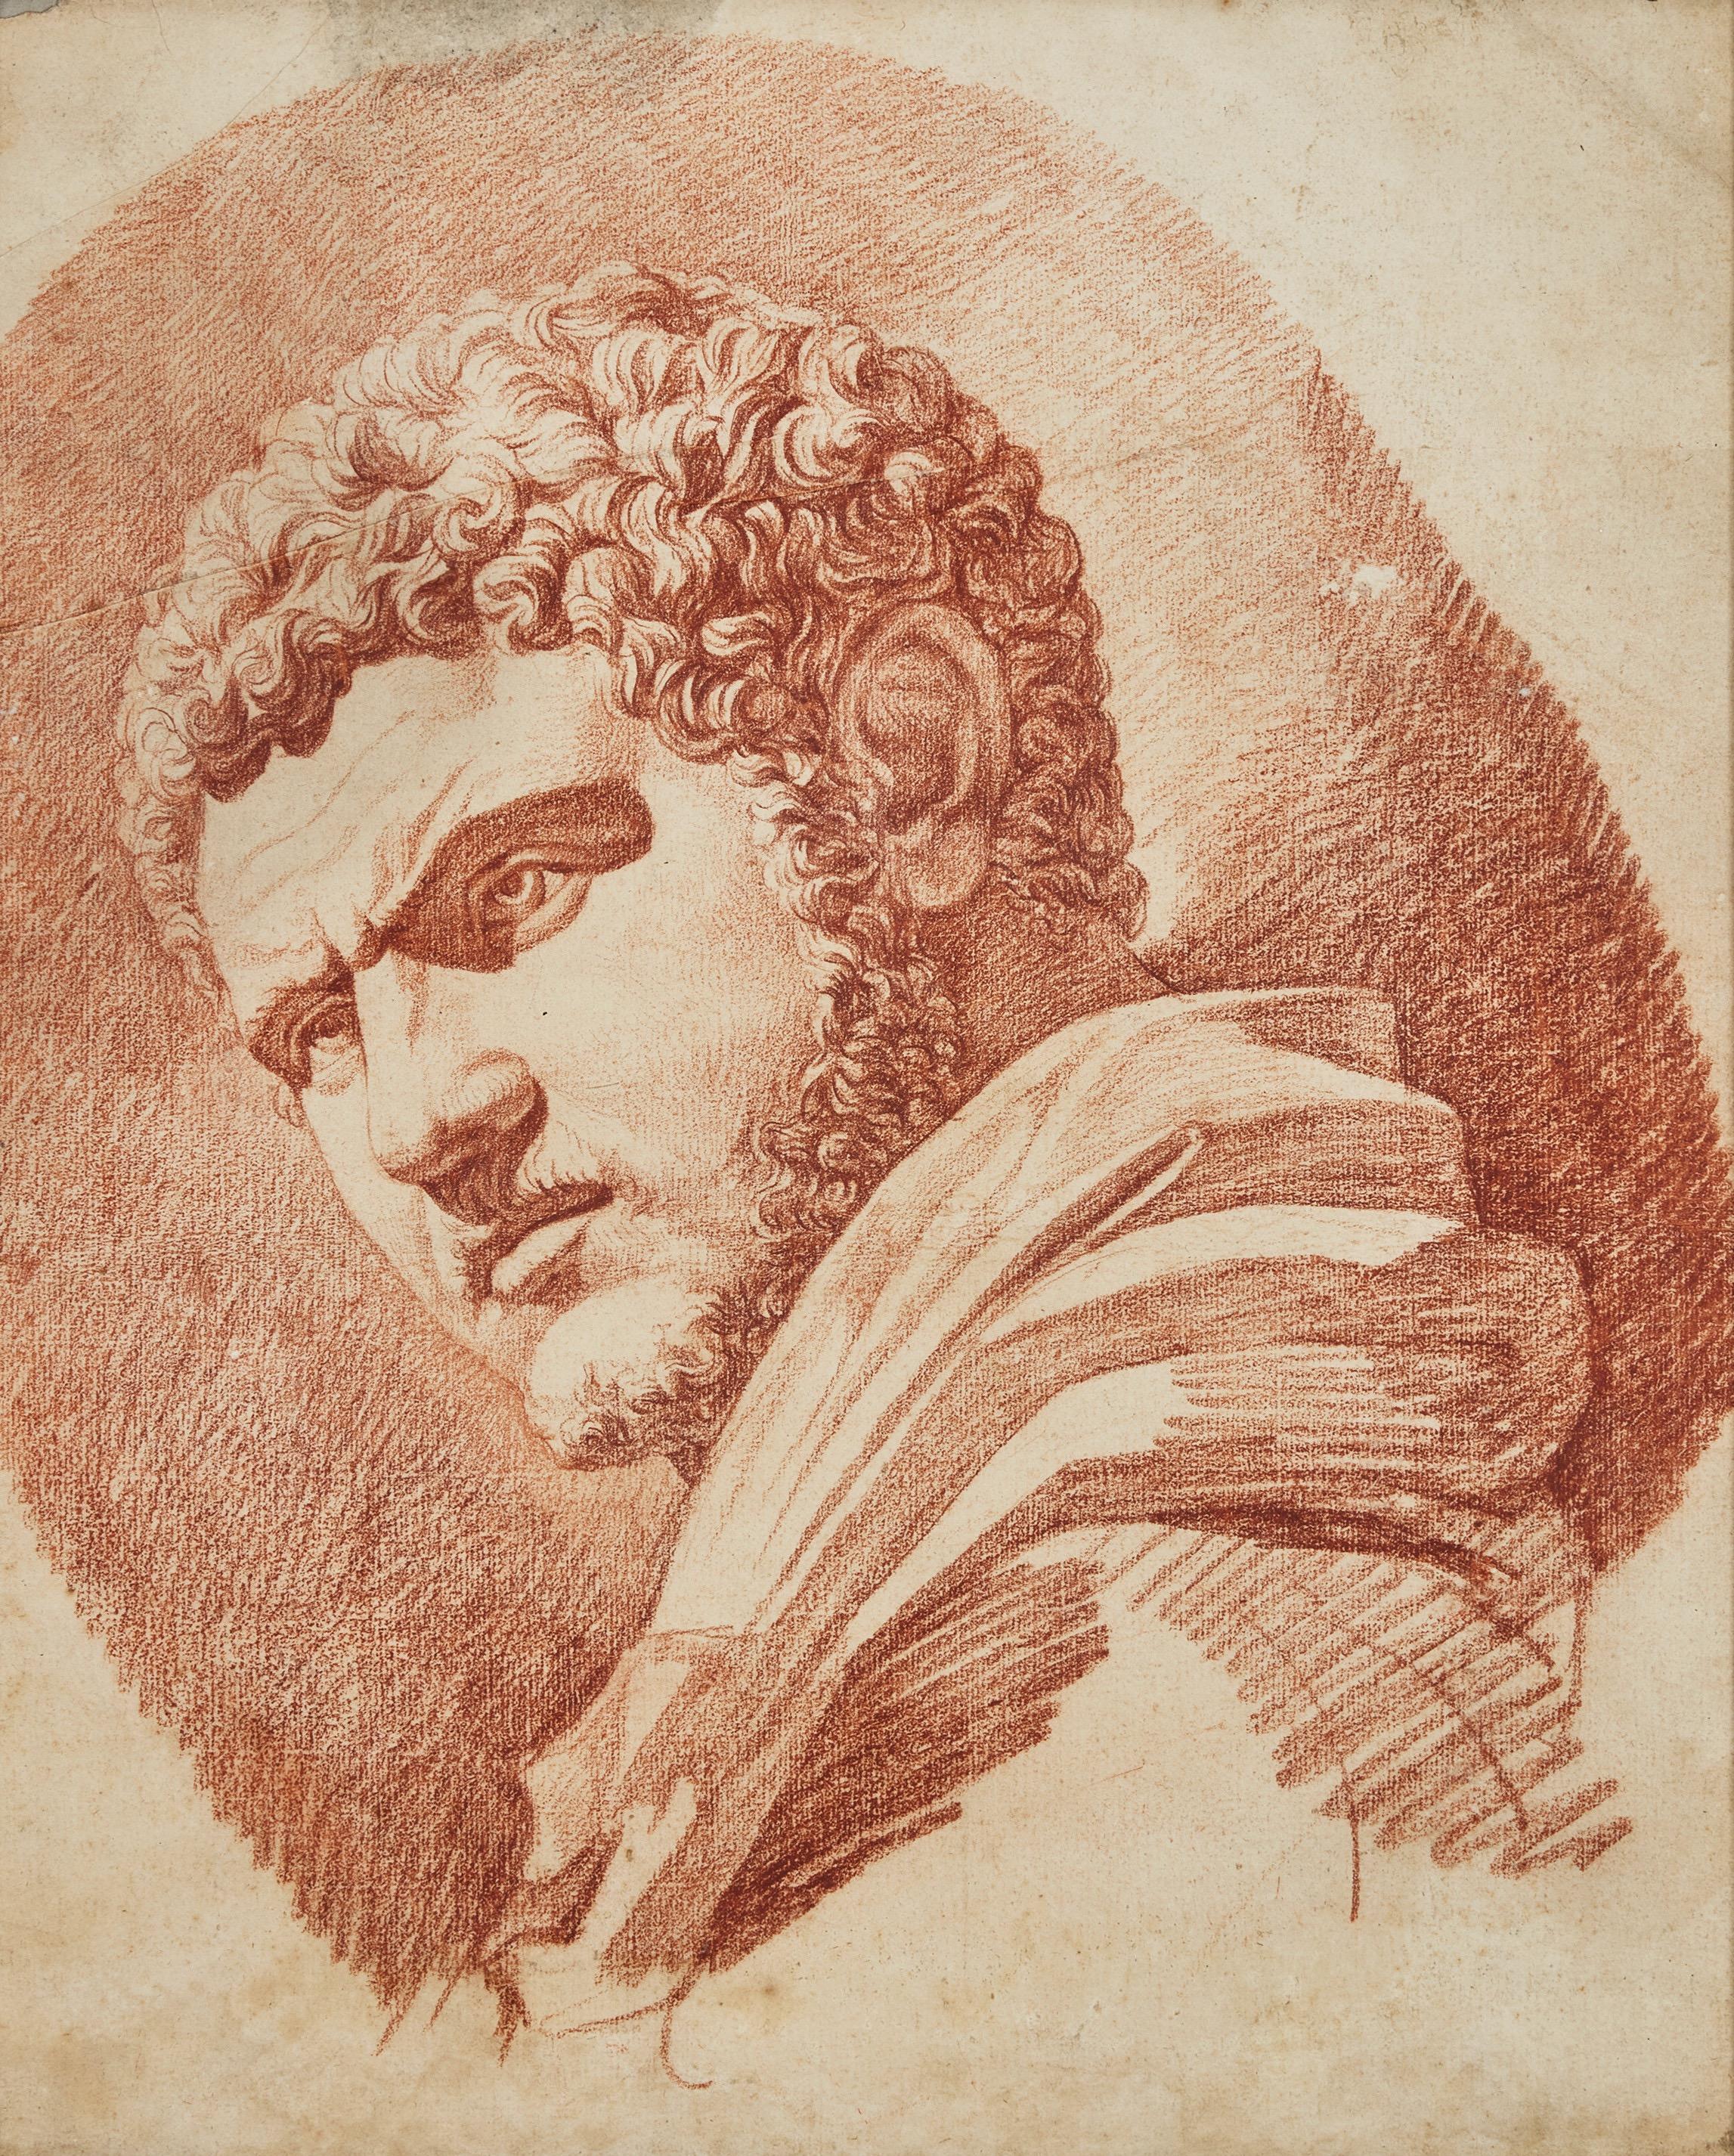  Caracalla, An 18th Century Drawing Attributed Drawing to Johan Tobias Sergel 1